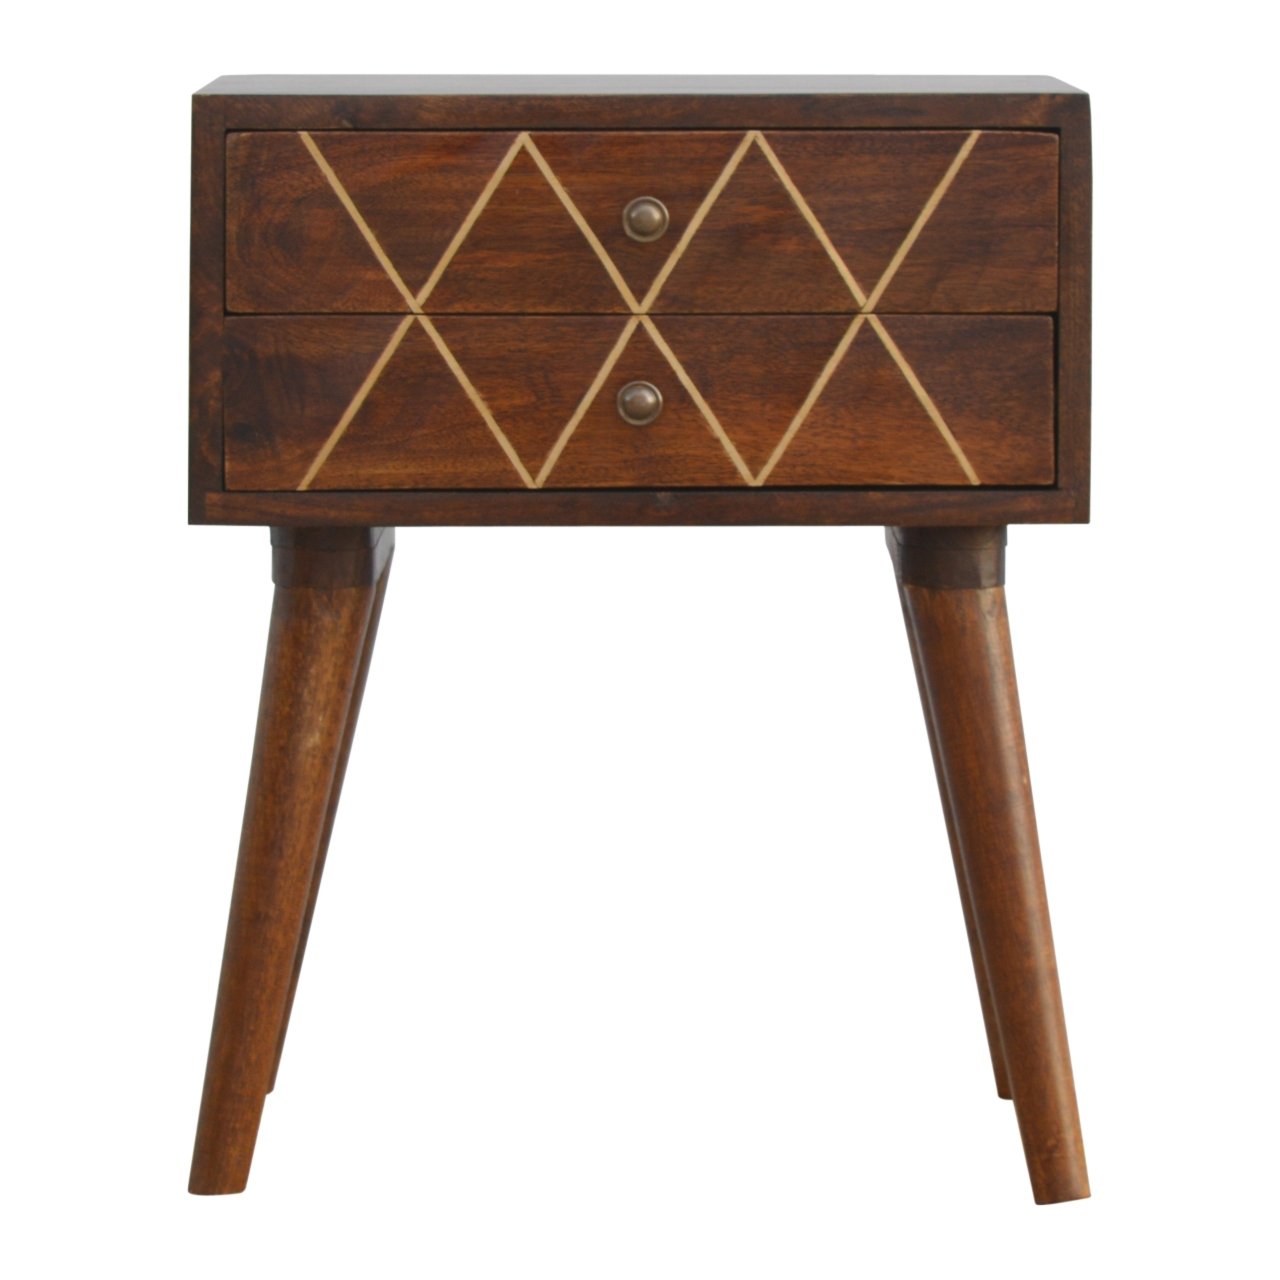 View Geometric Brass Inlay 2 Drawer Bedside information